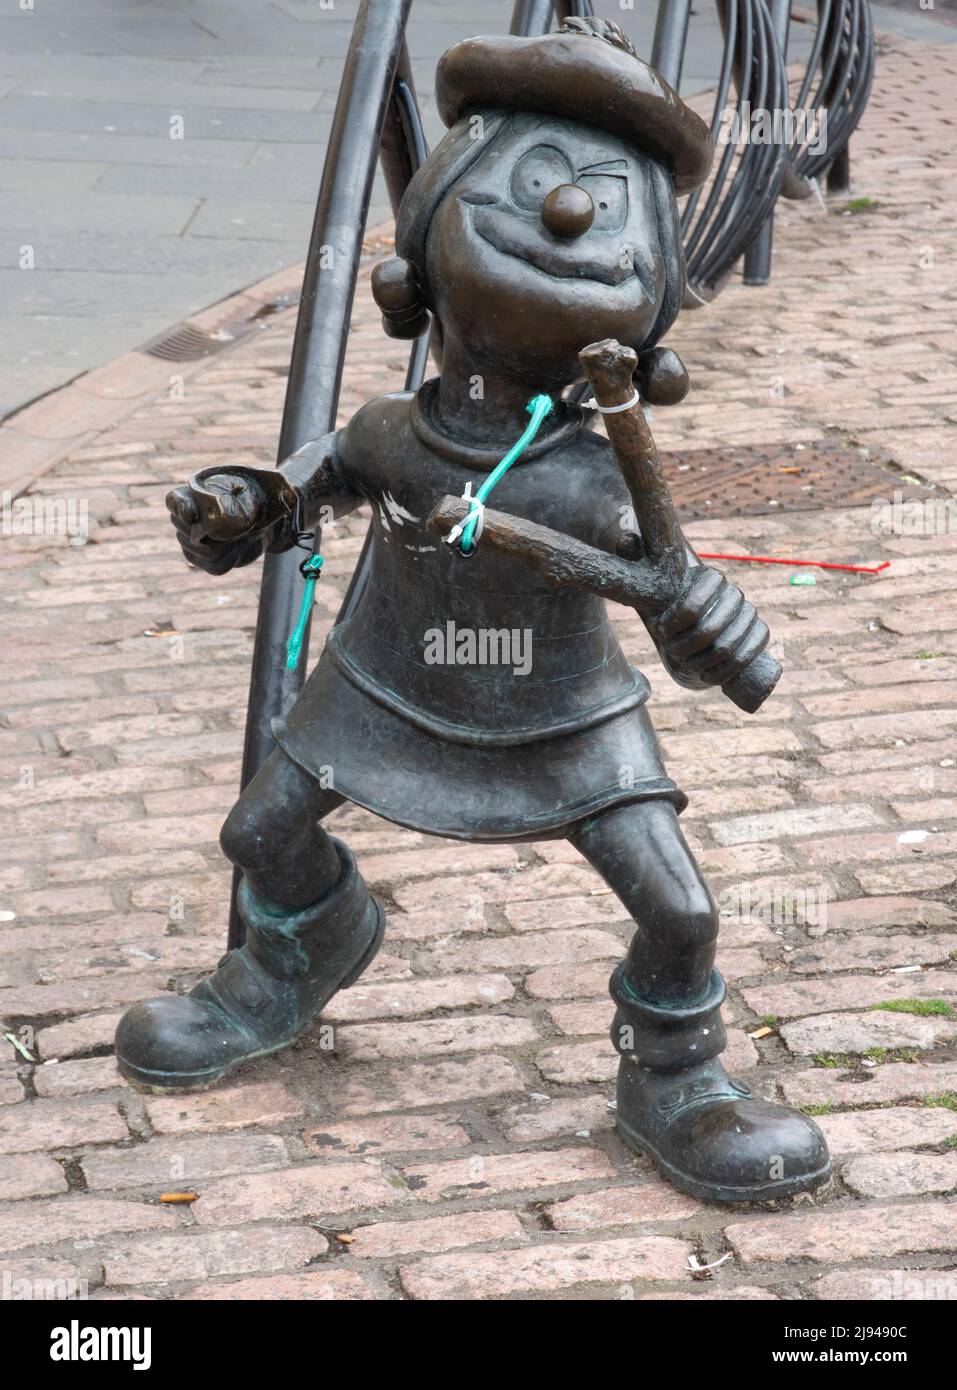 Sculpture of Minnie the Minx in Dundee Stock Photo